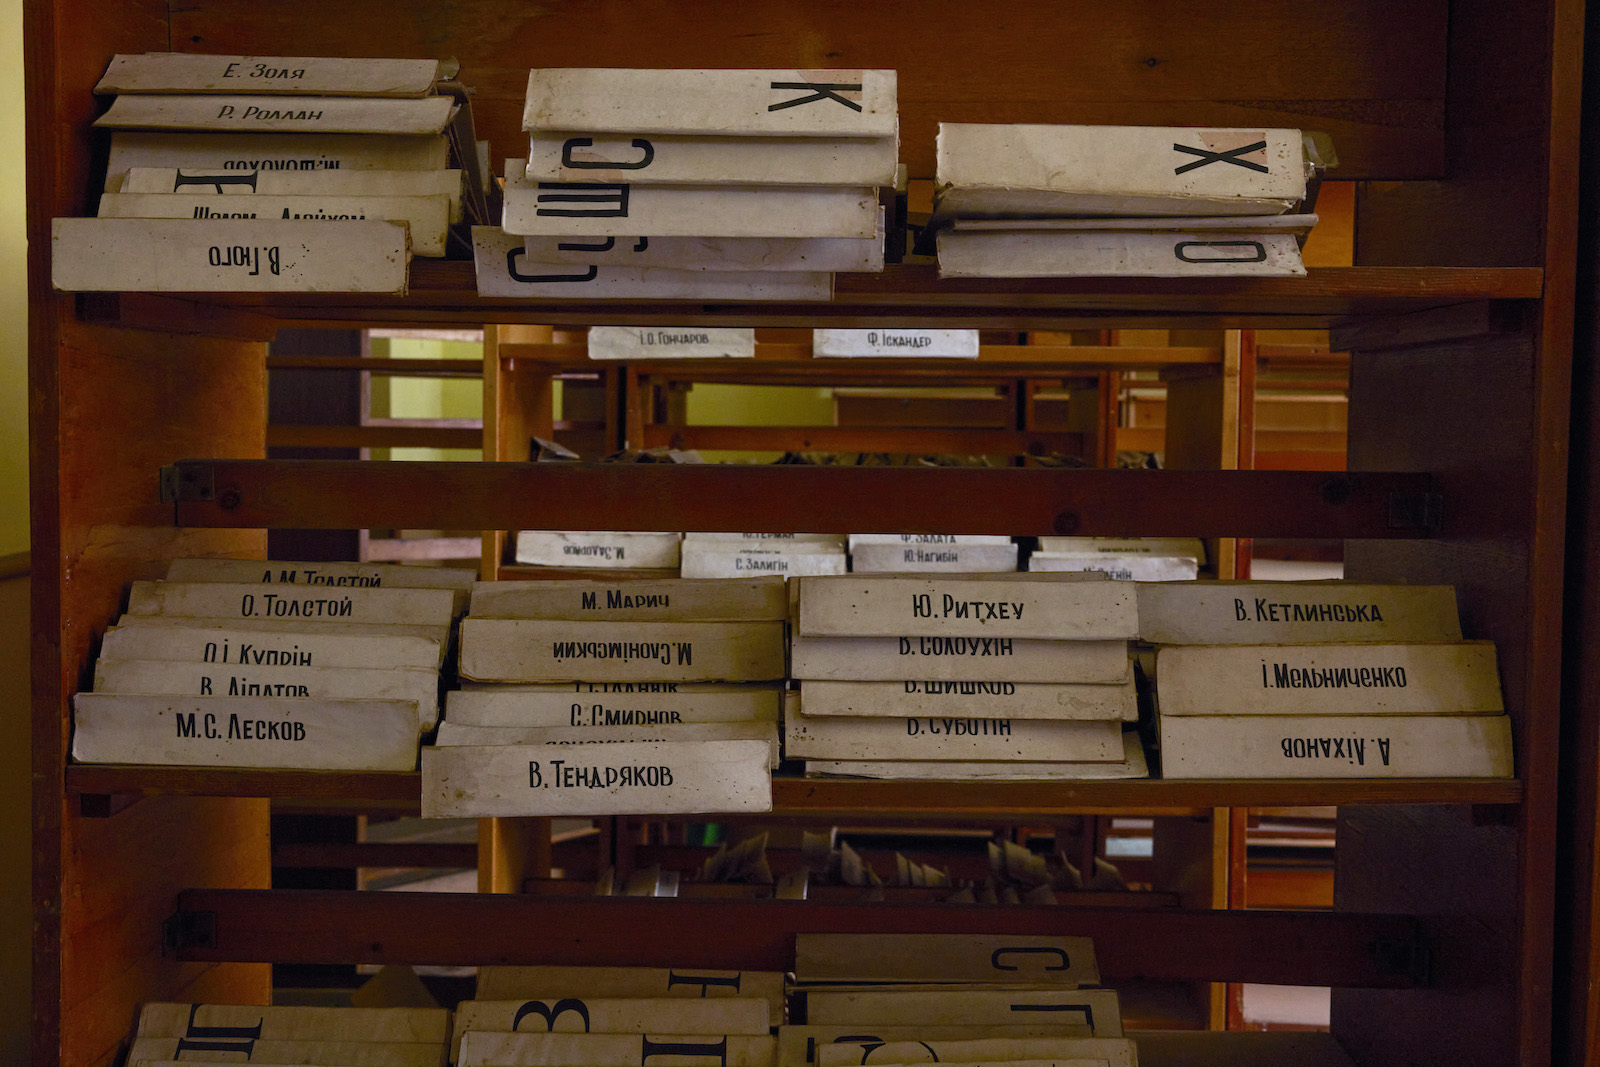 White cardboard subject dividers with labels in Ukrainian are stacked on empty wooden shelves